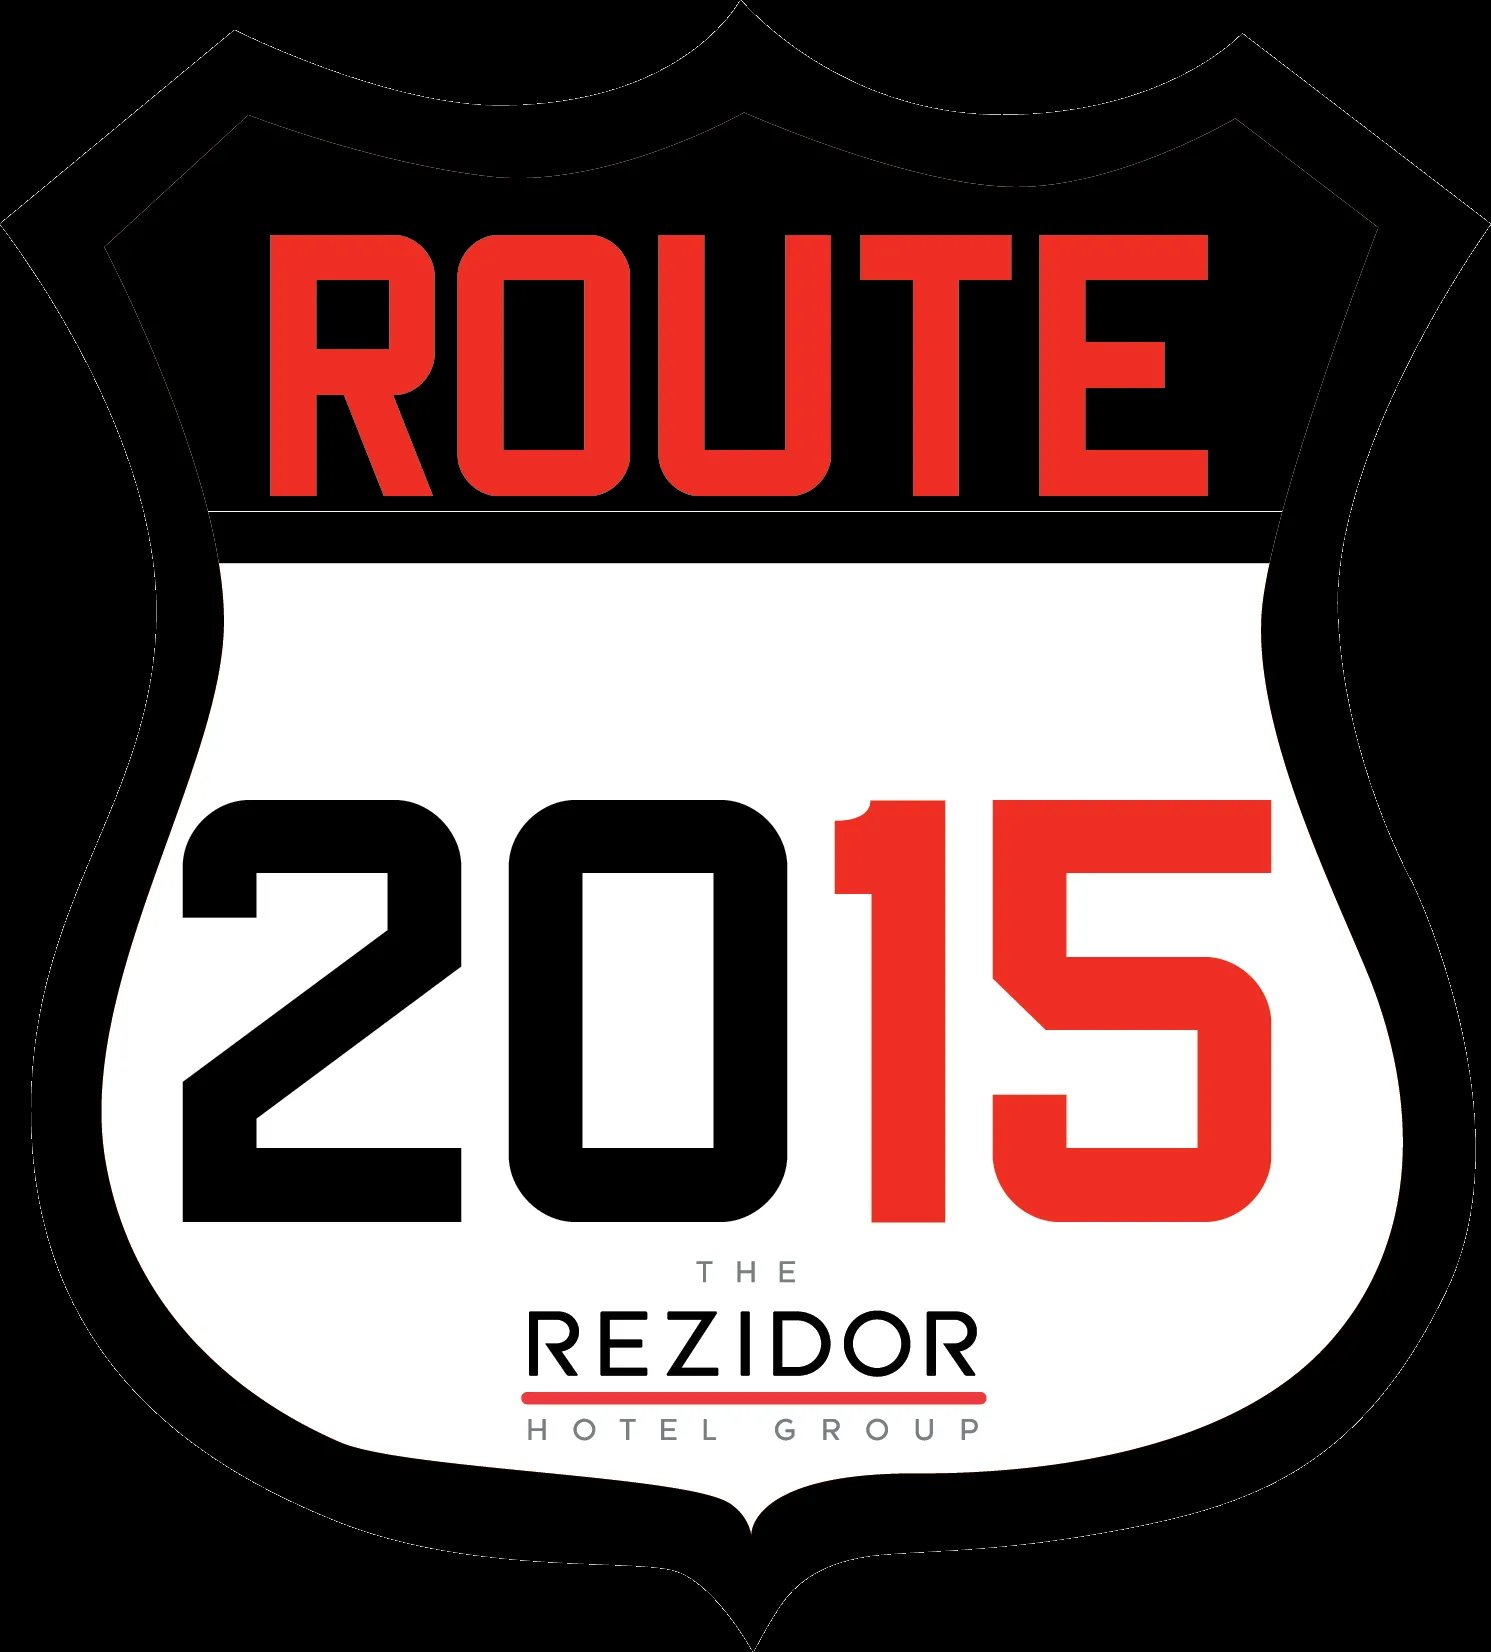 At the Rezidor Hotel Group’s Capital Market Day in London today, the company announces their “Route 2015 Strategy”